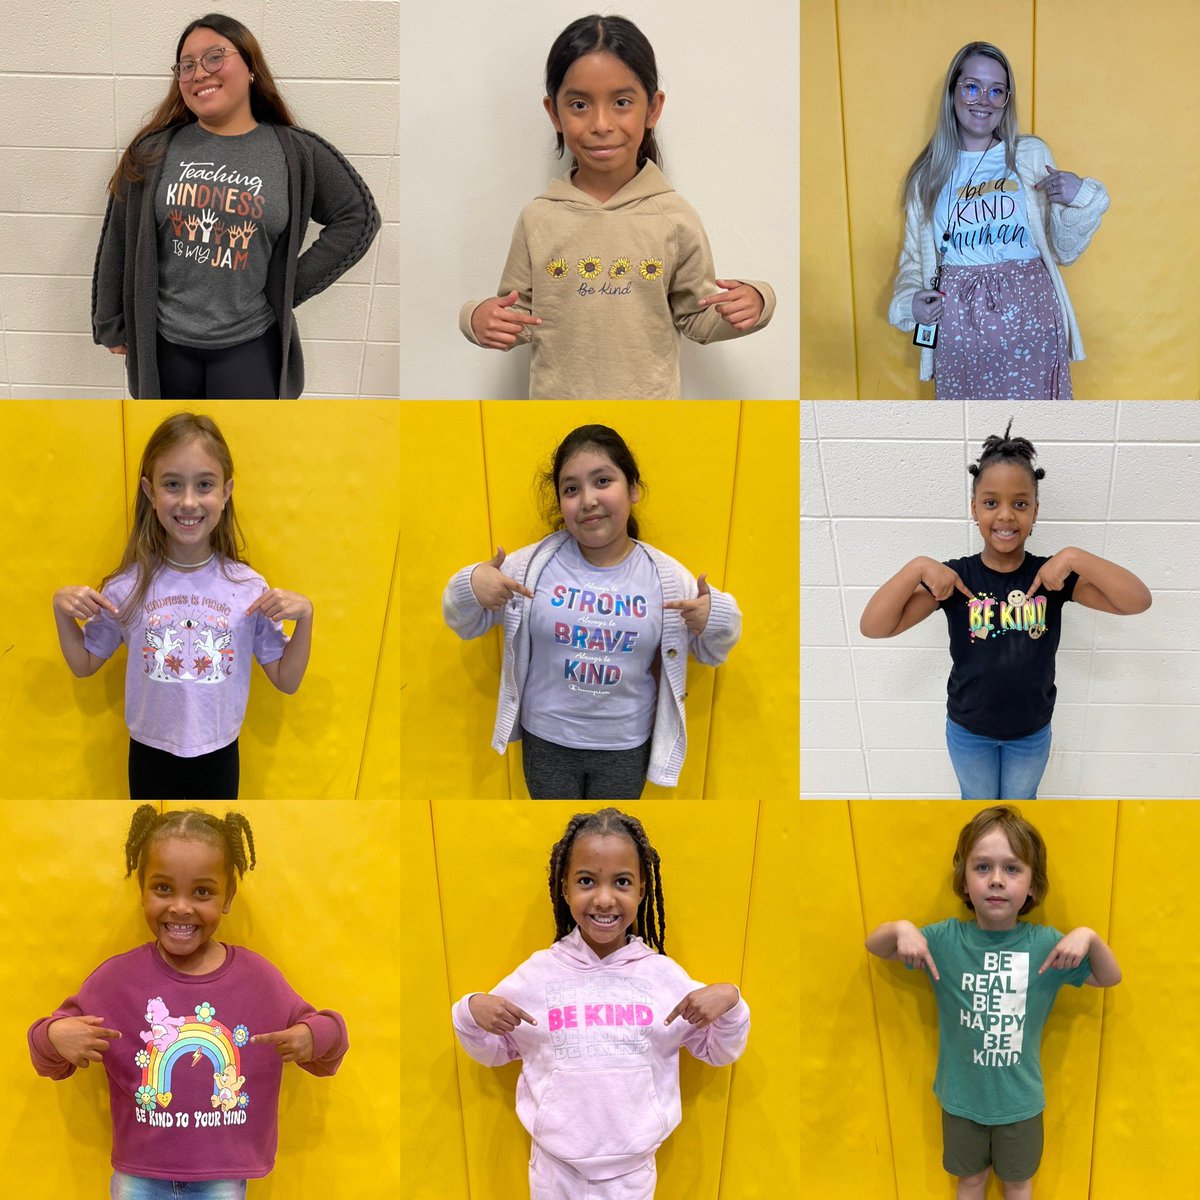 Another month down!
We love to recognize acts of KINDNESS along with our Golden Shoe winners at Skiles Test!
💛💙
Our April PE stars!
On the homestretch!🏁
#april#thisisMay 
#wewearkindness#fitkids 
#skilestest#ilovemyjob
#livinthedream#BeKind @ltgoodnews